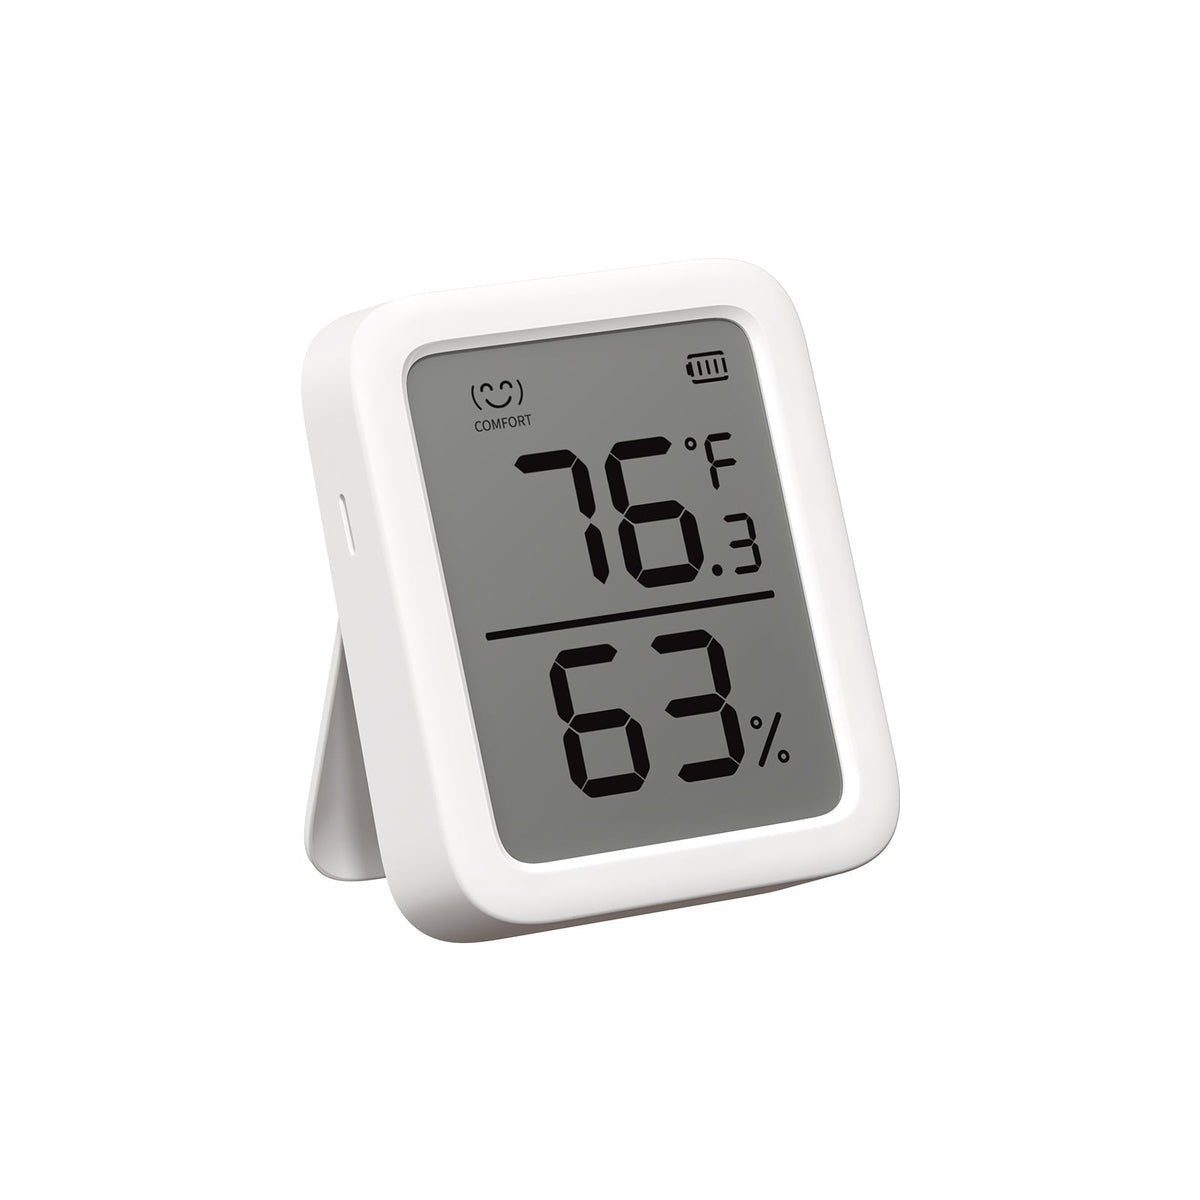 2 in 1 Electronic Accurate Humidity Meter, Cute Indoor Room